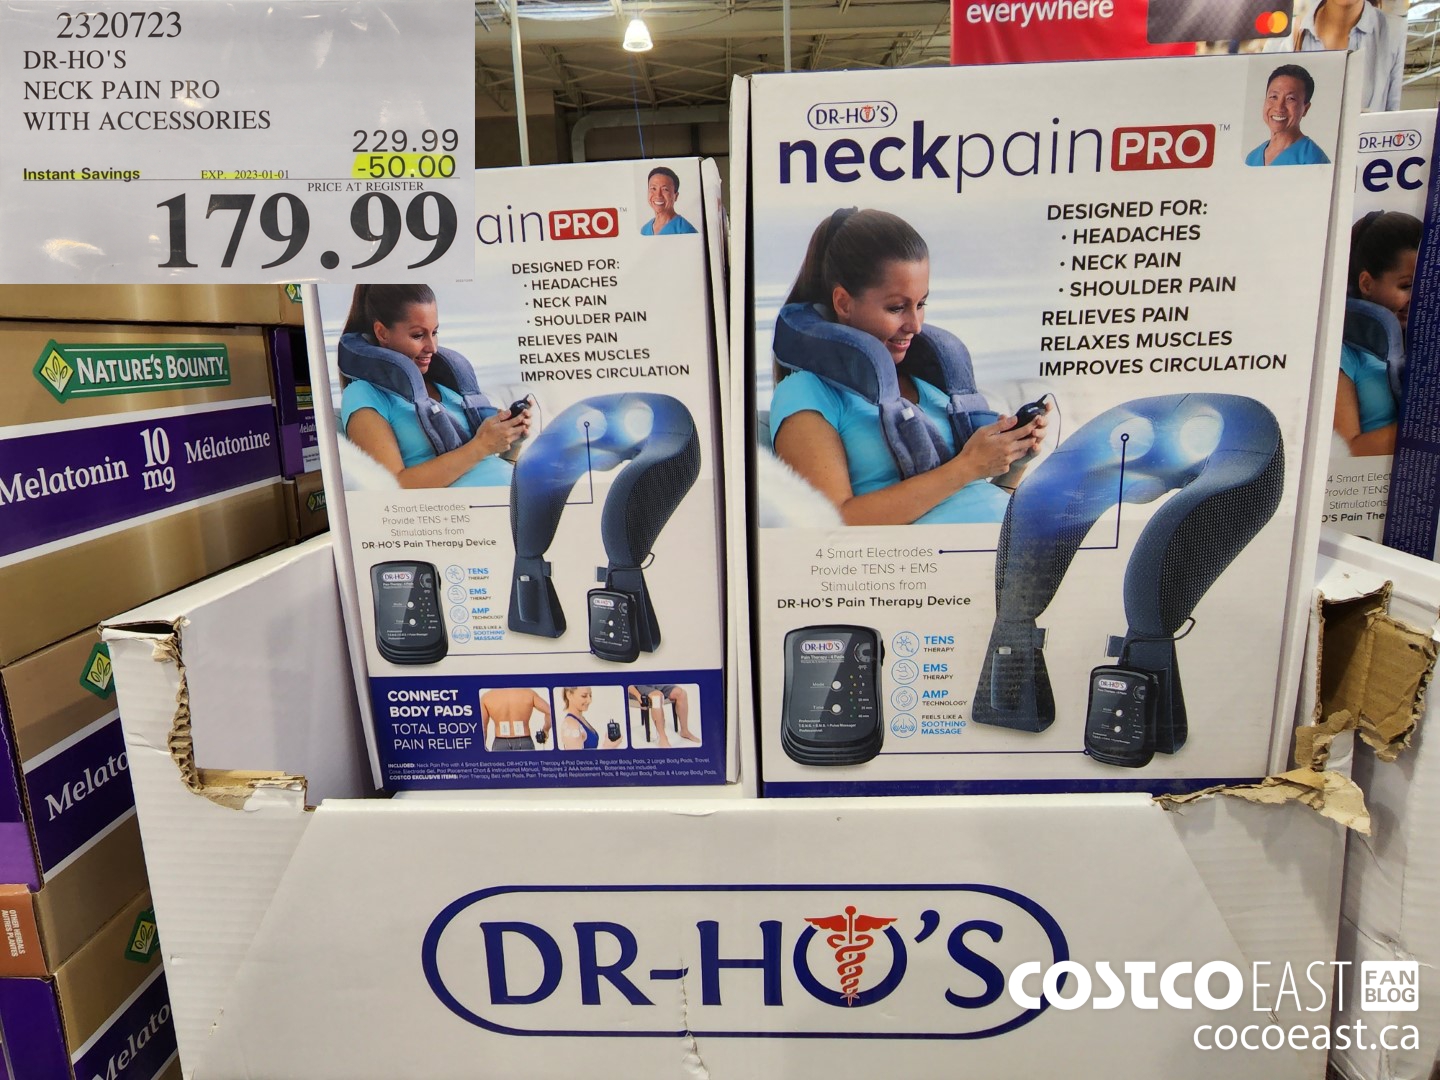 2520723 DR HO S NECK PAIN PRO WITH ACCESSORIES 50 00 INSTANT SAVINGS  EXPIRES ON 2023 01 01 179 99 - Costco East Fan Blog